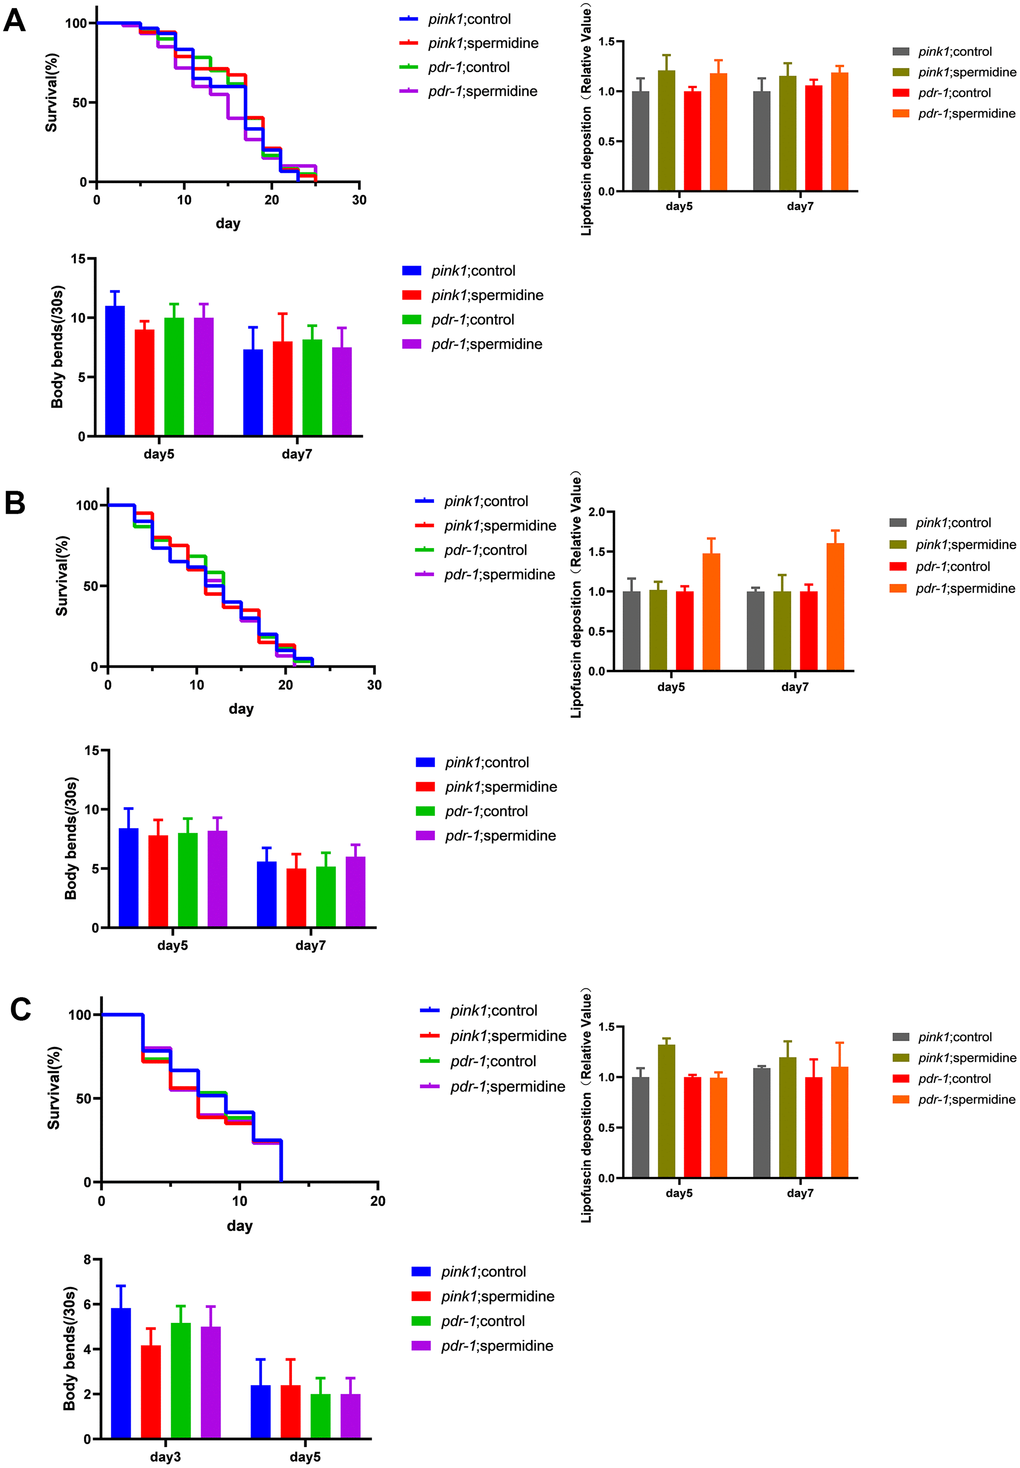 Effects of spermidine on RNAi knockdown of pink1 and pdr-1 nematodes. (A) Effect of spermidine treatment on survival curves(n=85-101), lipofuscin deposition level(n=15), and locomotor capacity of wrn-1(gk99) worms(n=20). (B) Effect of spermidine treatment on survival curves(n=87-98), α-synuclein level(n=15), and locomotor capacity of NL5901 worms(n=20) (C) Effect of spermidine treatment on survival curves(n=92-97), lipofuscin deposition level(n=15), and locomotor capacity of UM0001 worms(n=20). Data are represented as mean± SD, *P P 